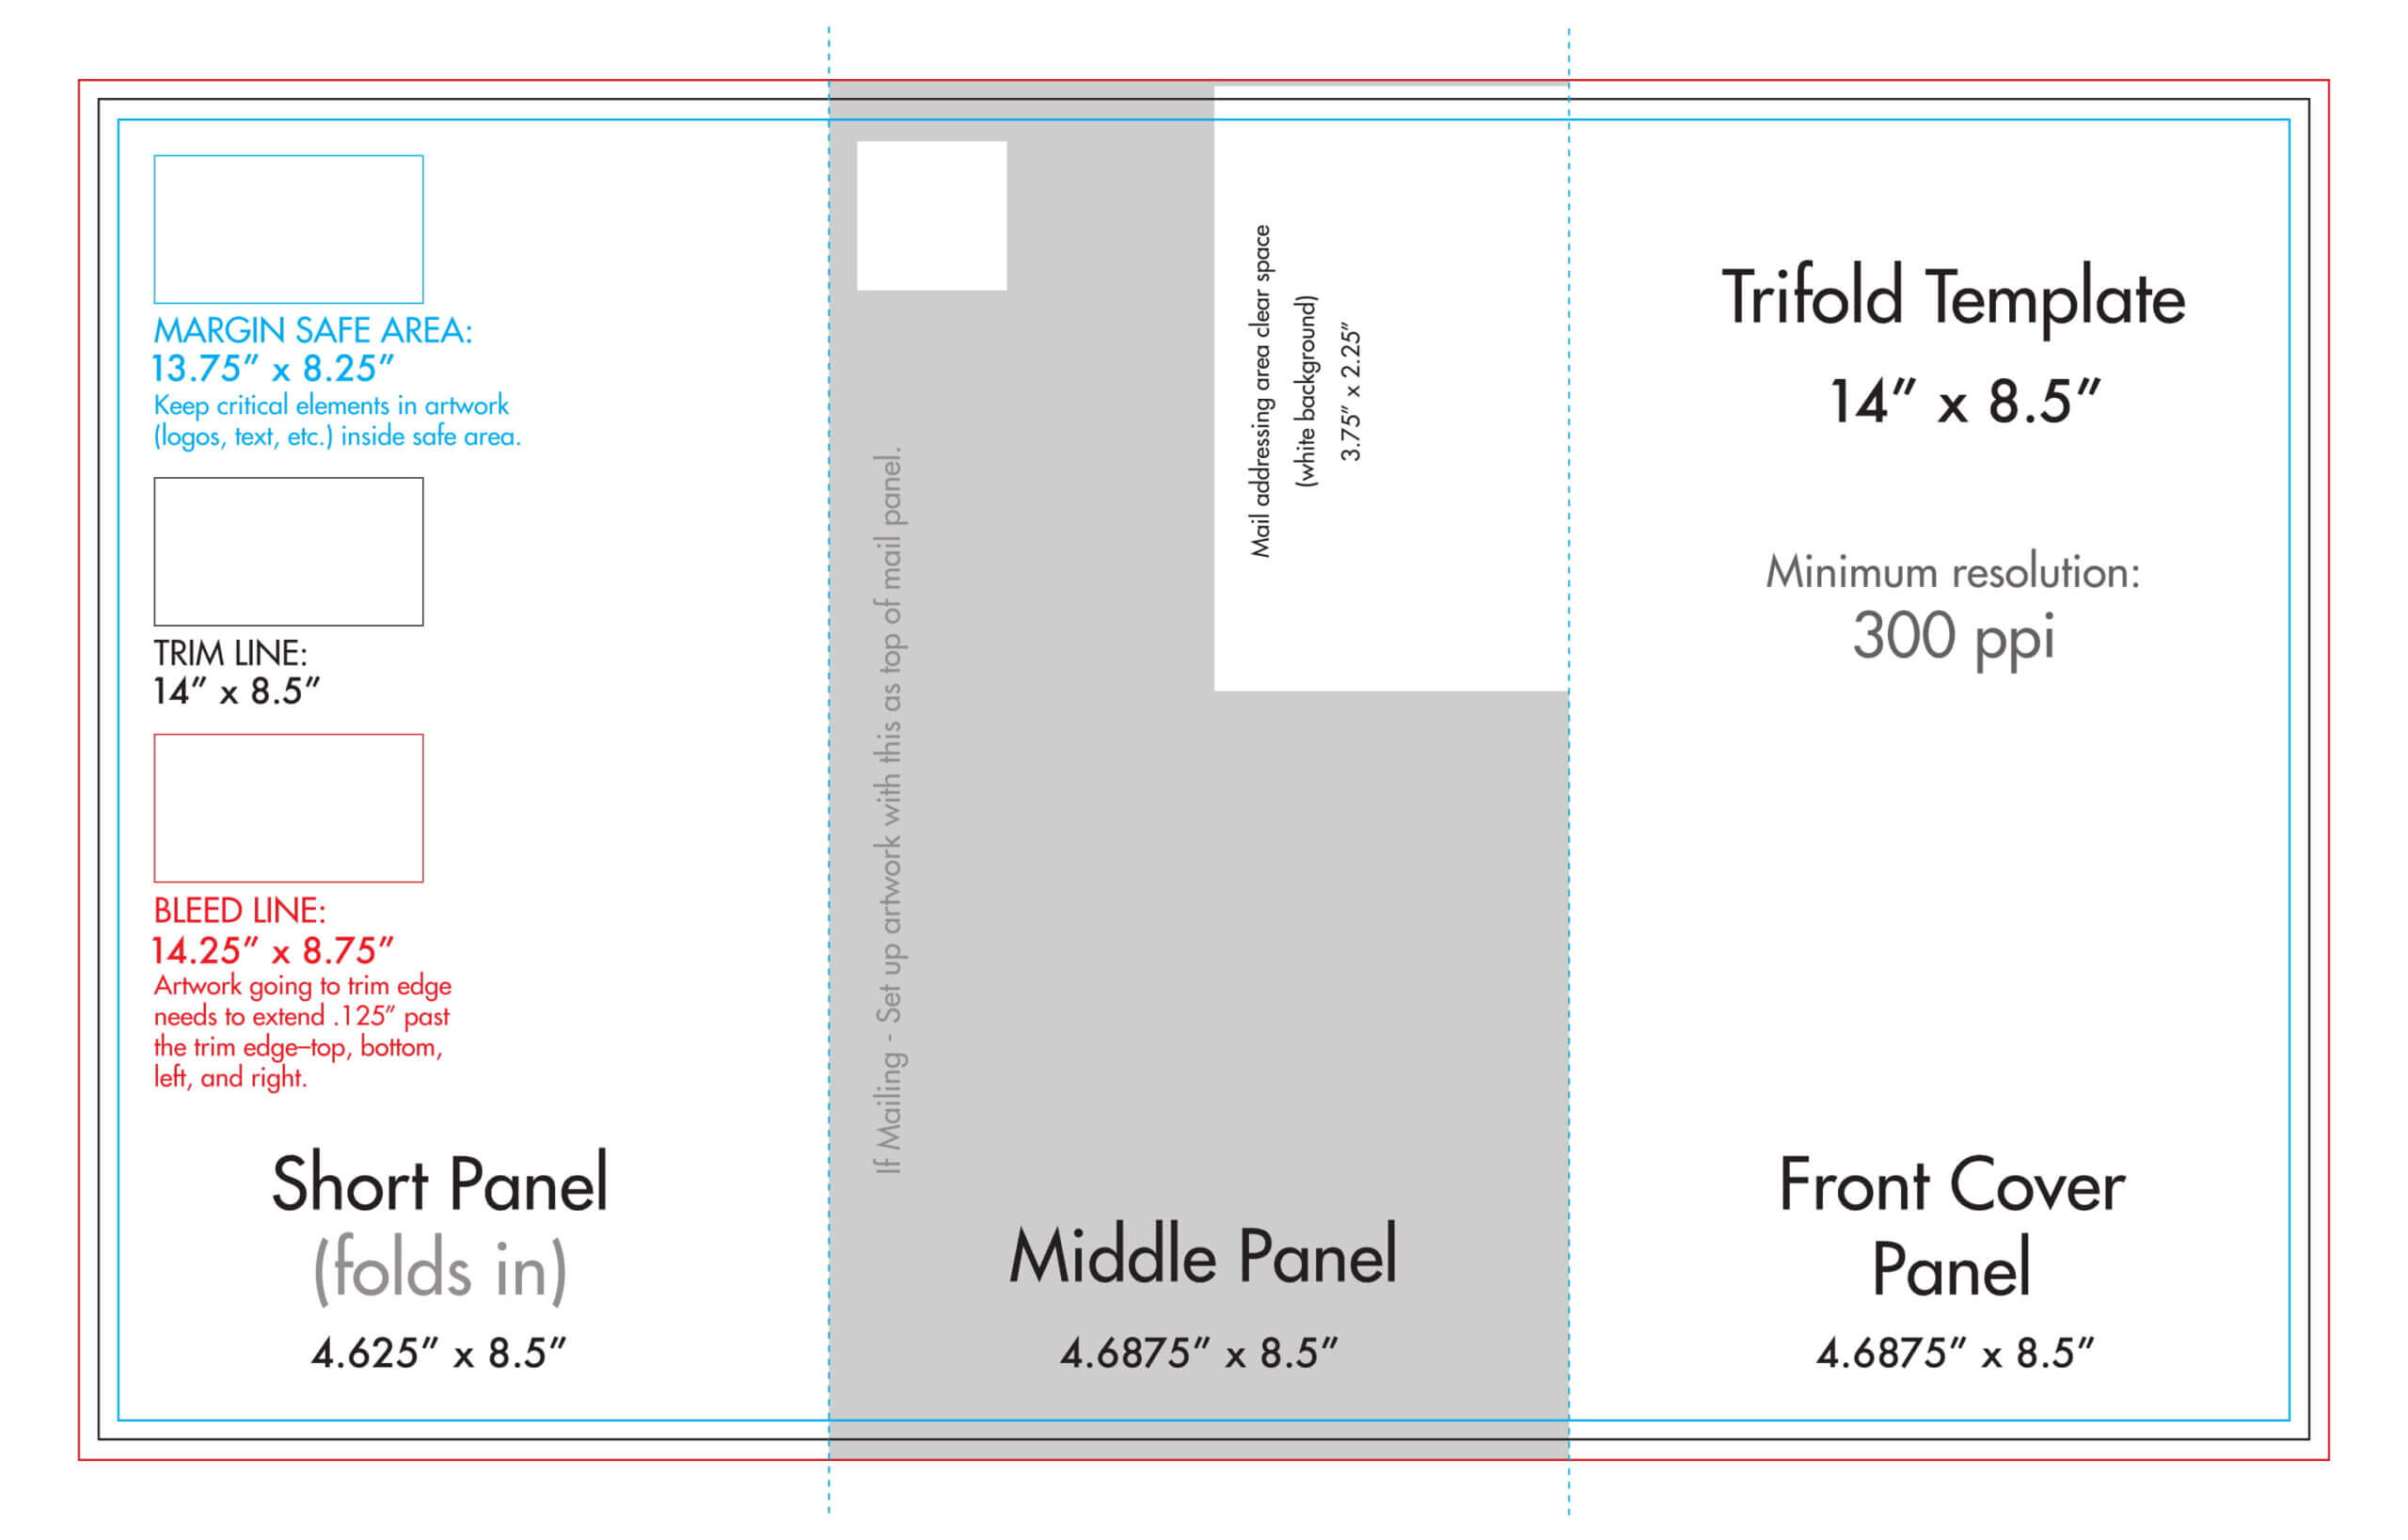 007 Trifold 8 5X14 Template Ideas Tri Fold Flyer Fascinating With Brochure Folding Templates